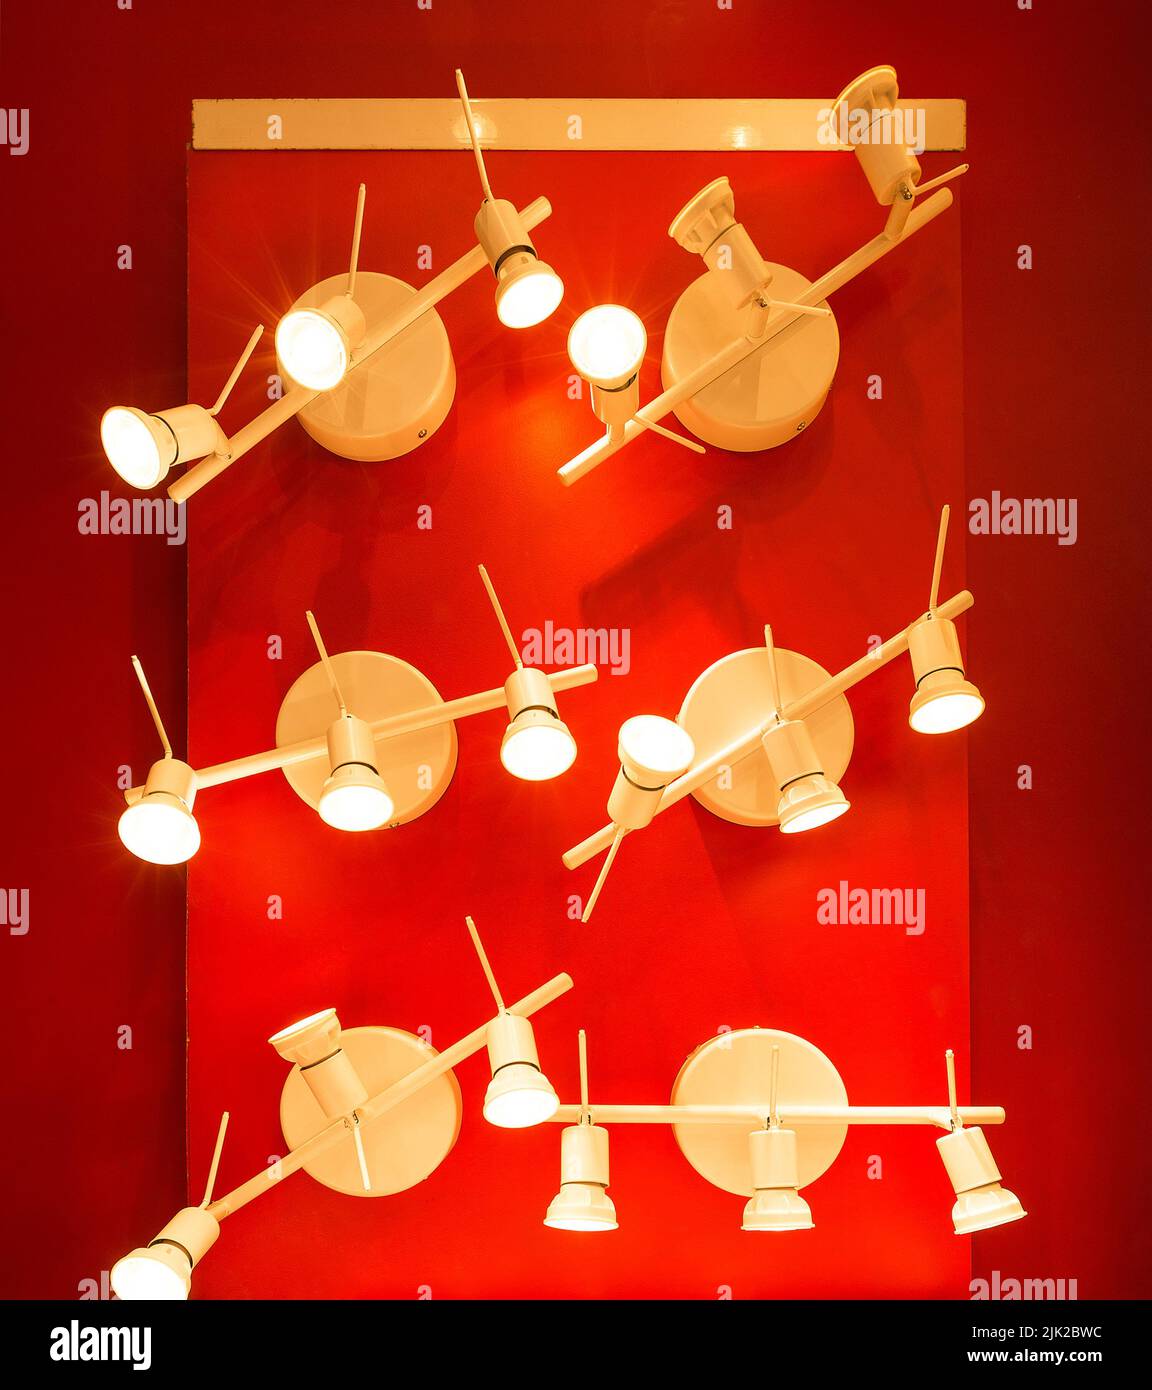 the on-wall red art object with halogen lamps Stock Photo